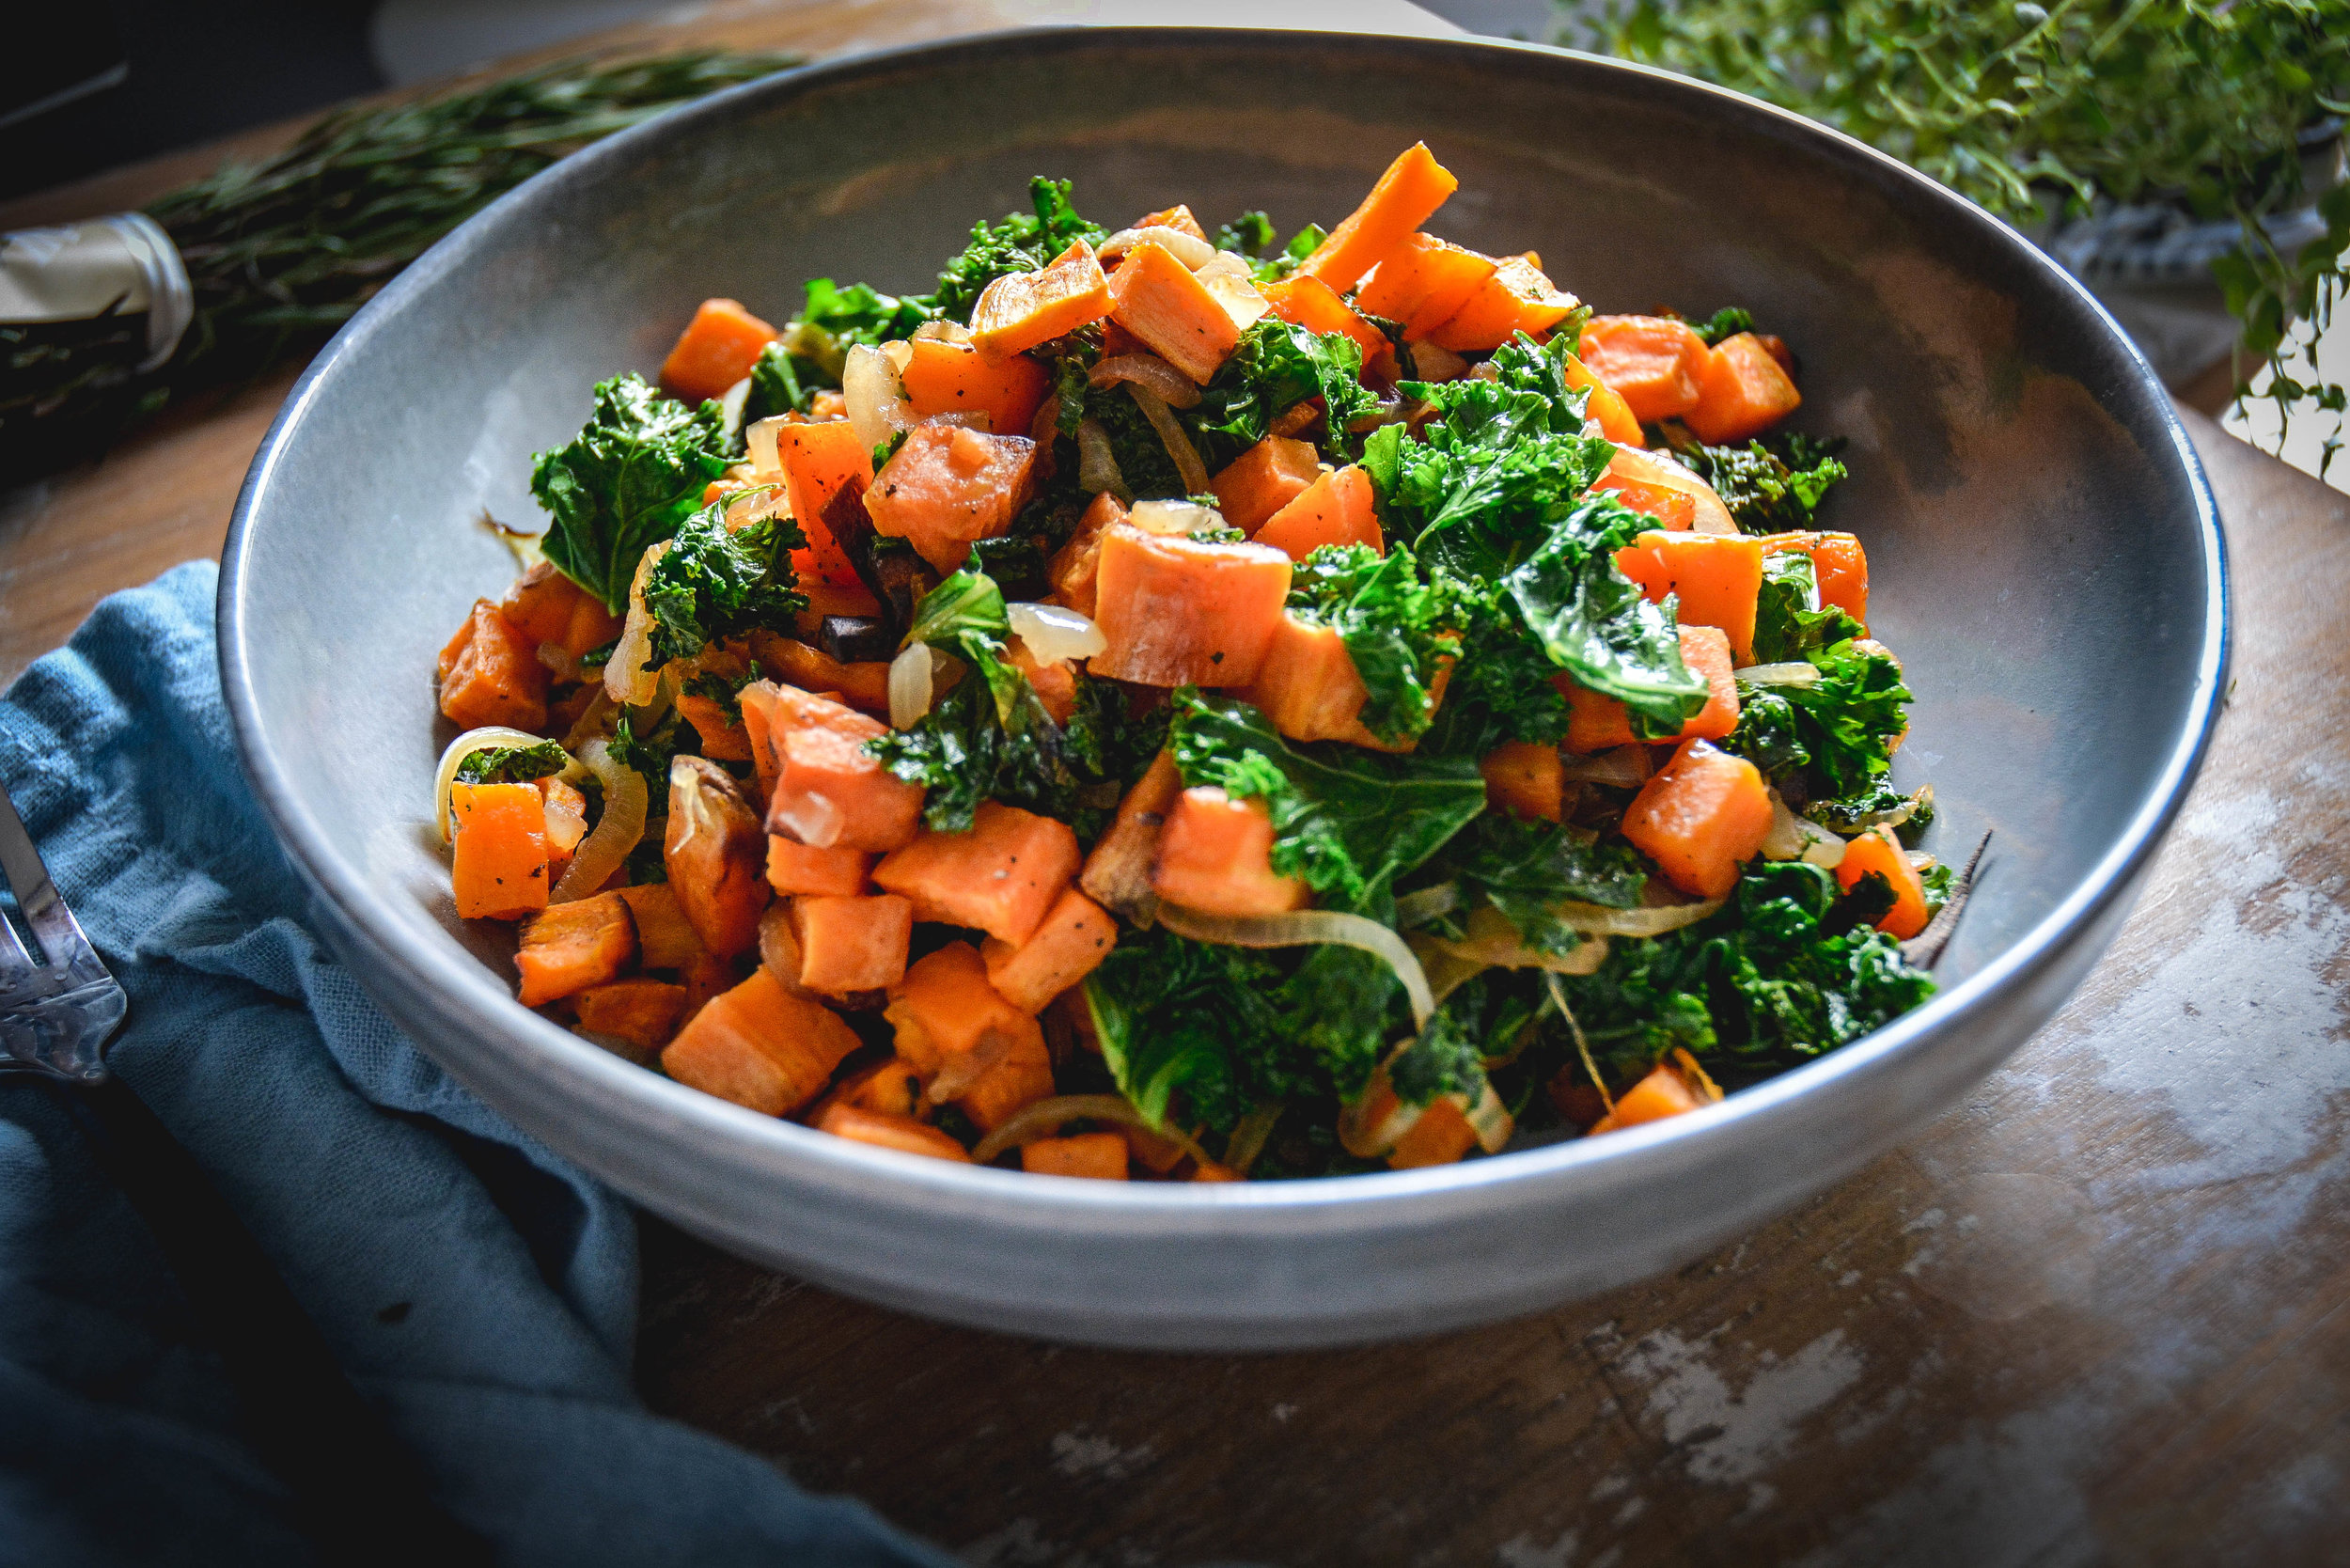 sweet potatoes with kale in bowl, on table with blue napkin